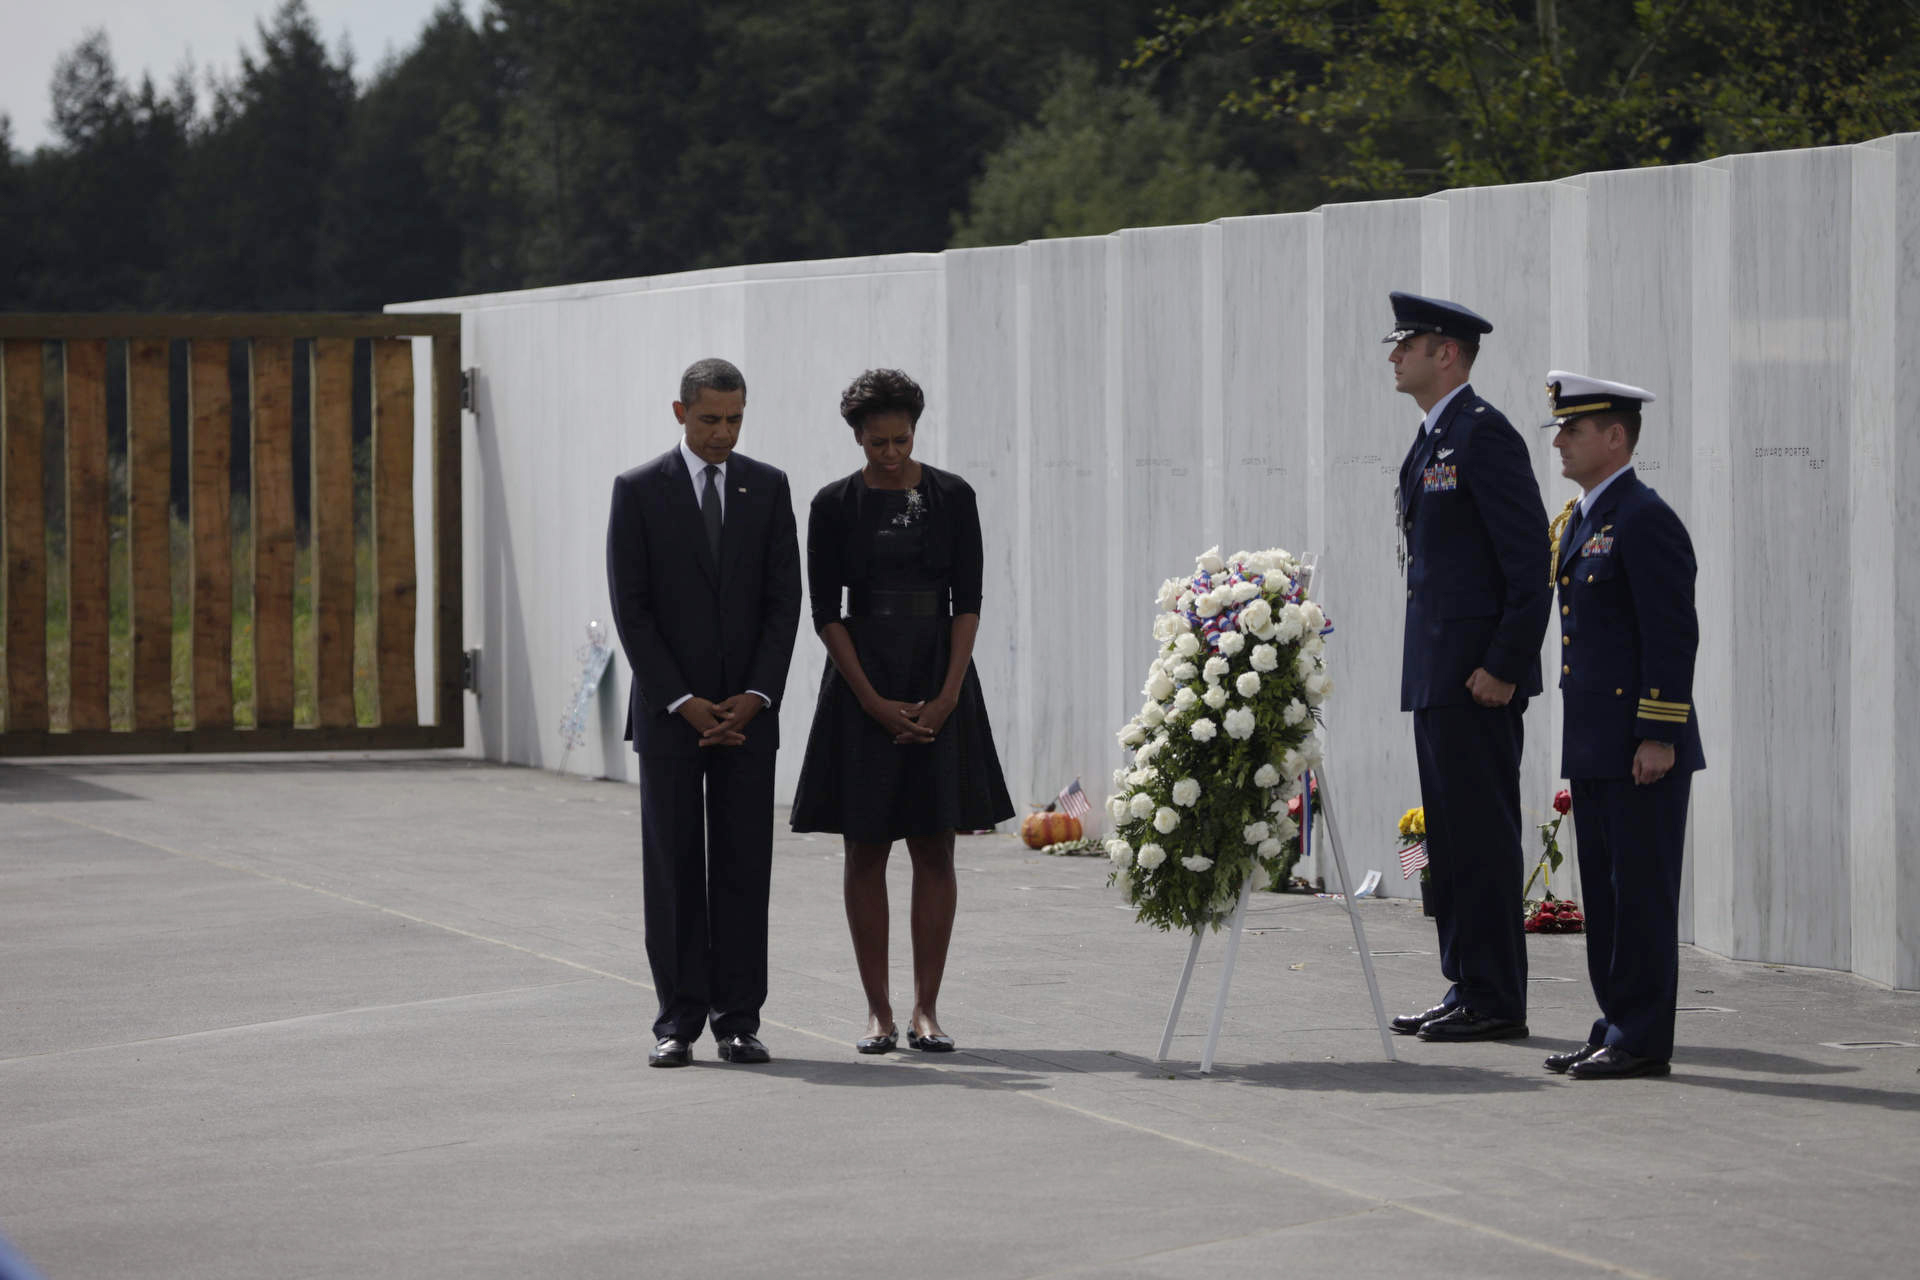 President Obama and First Lady Michelle Obama participate in a wreath laying ceremony in Shanksville PA